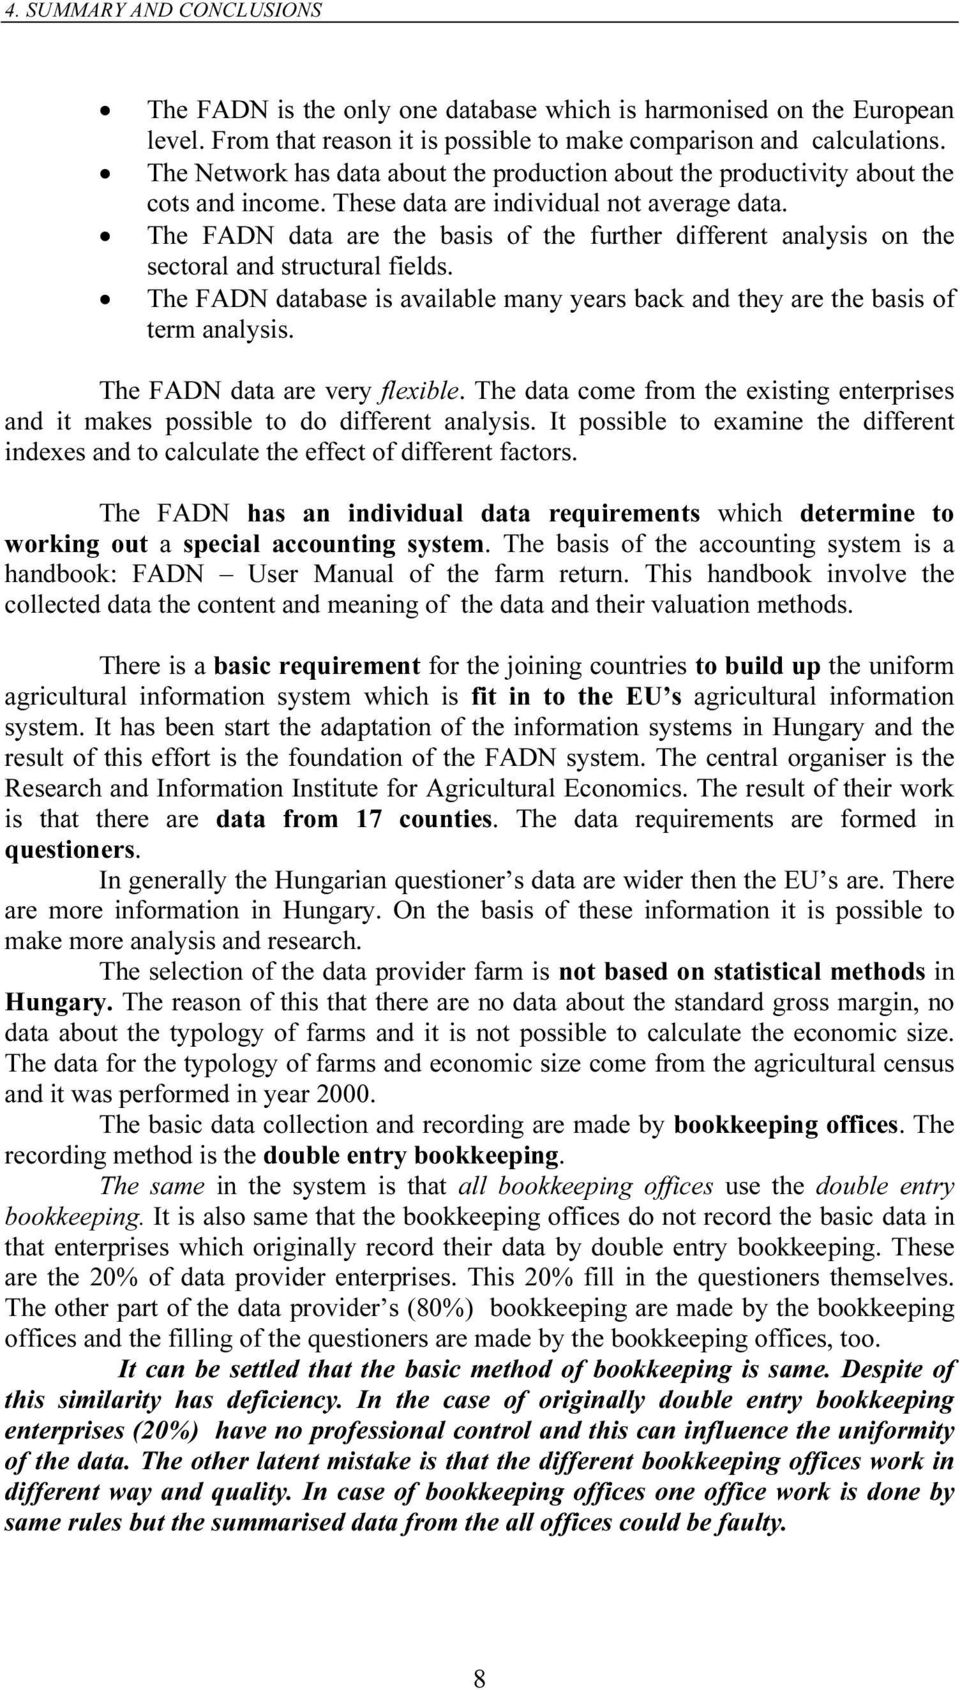 The FADN data are the basis of the further different analysis on the sectoral and structural fields. The FADN database is available many years back and they are the basis of term analysis.